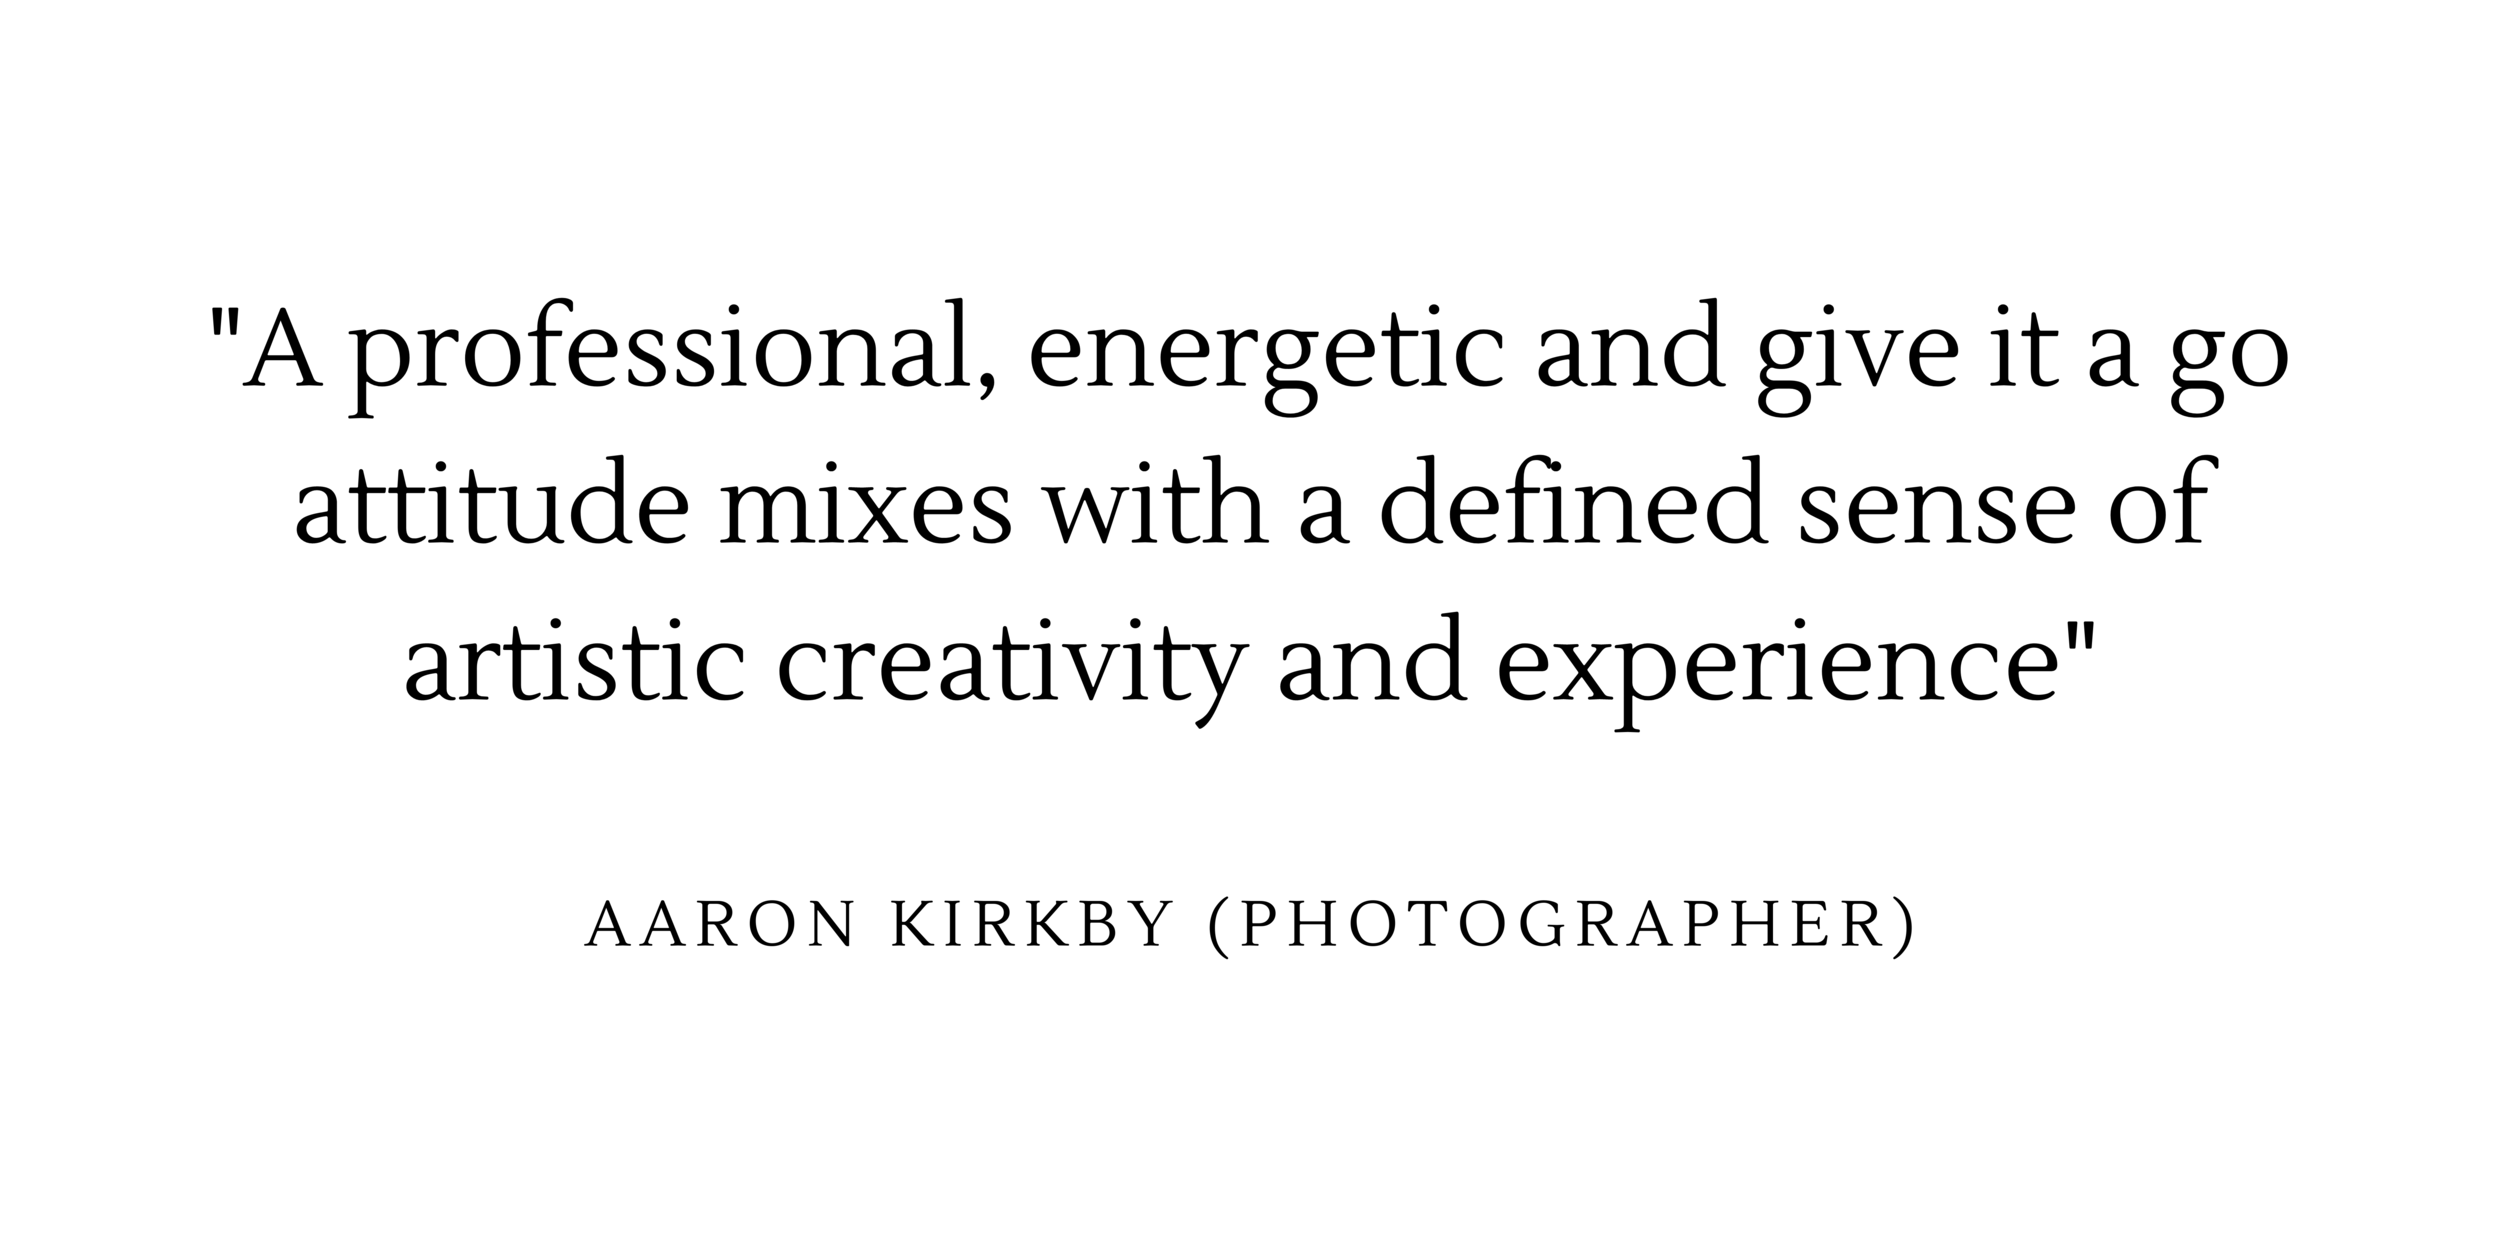  “A professional, energetic and give it a go attitude mixed with a defined sense of artistic creativity and experience” - Aaron Kirkby (photographer) 